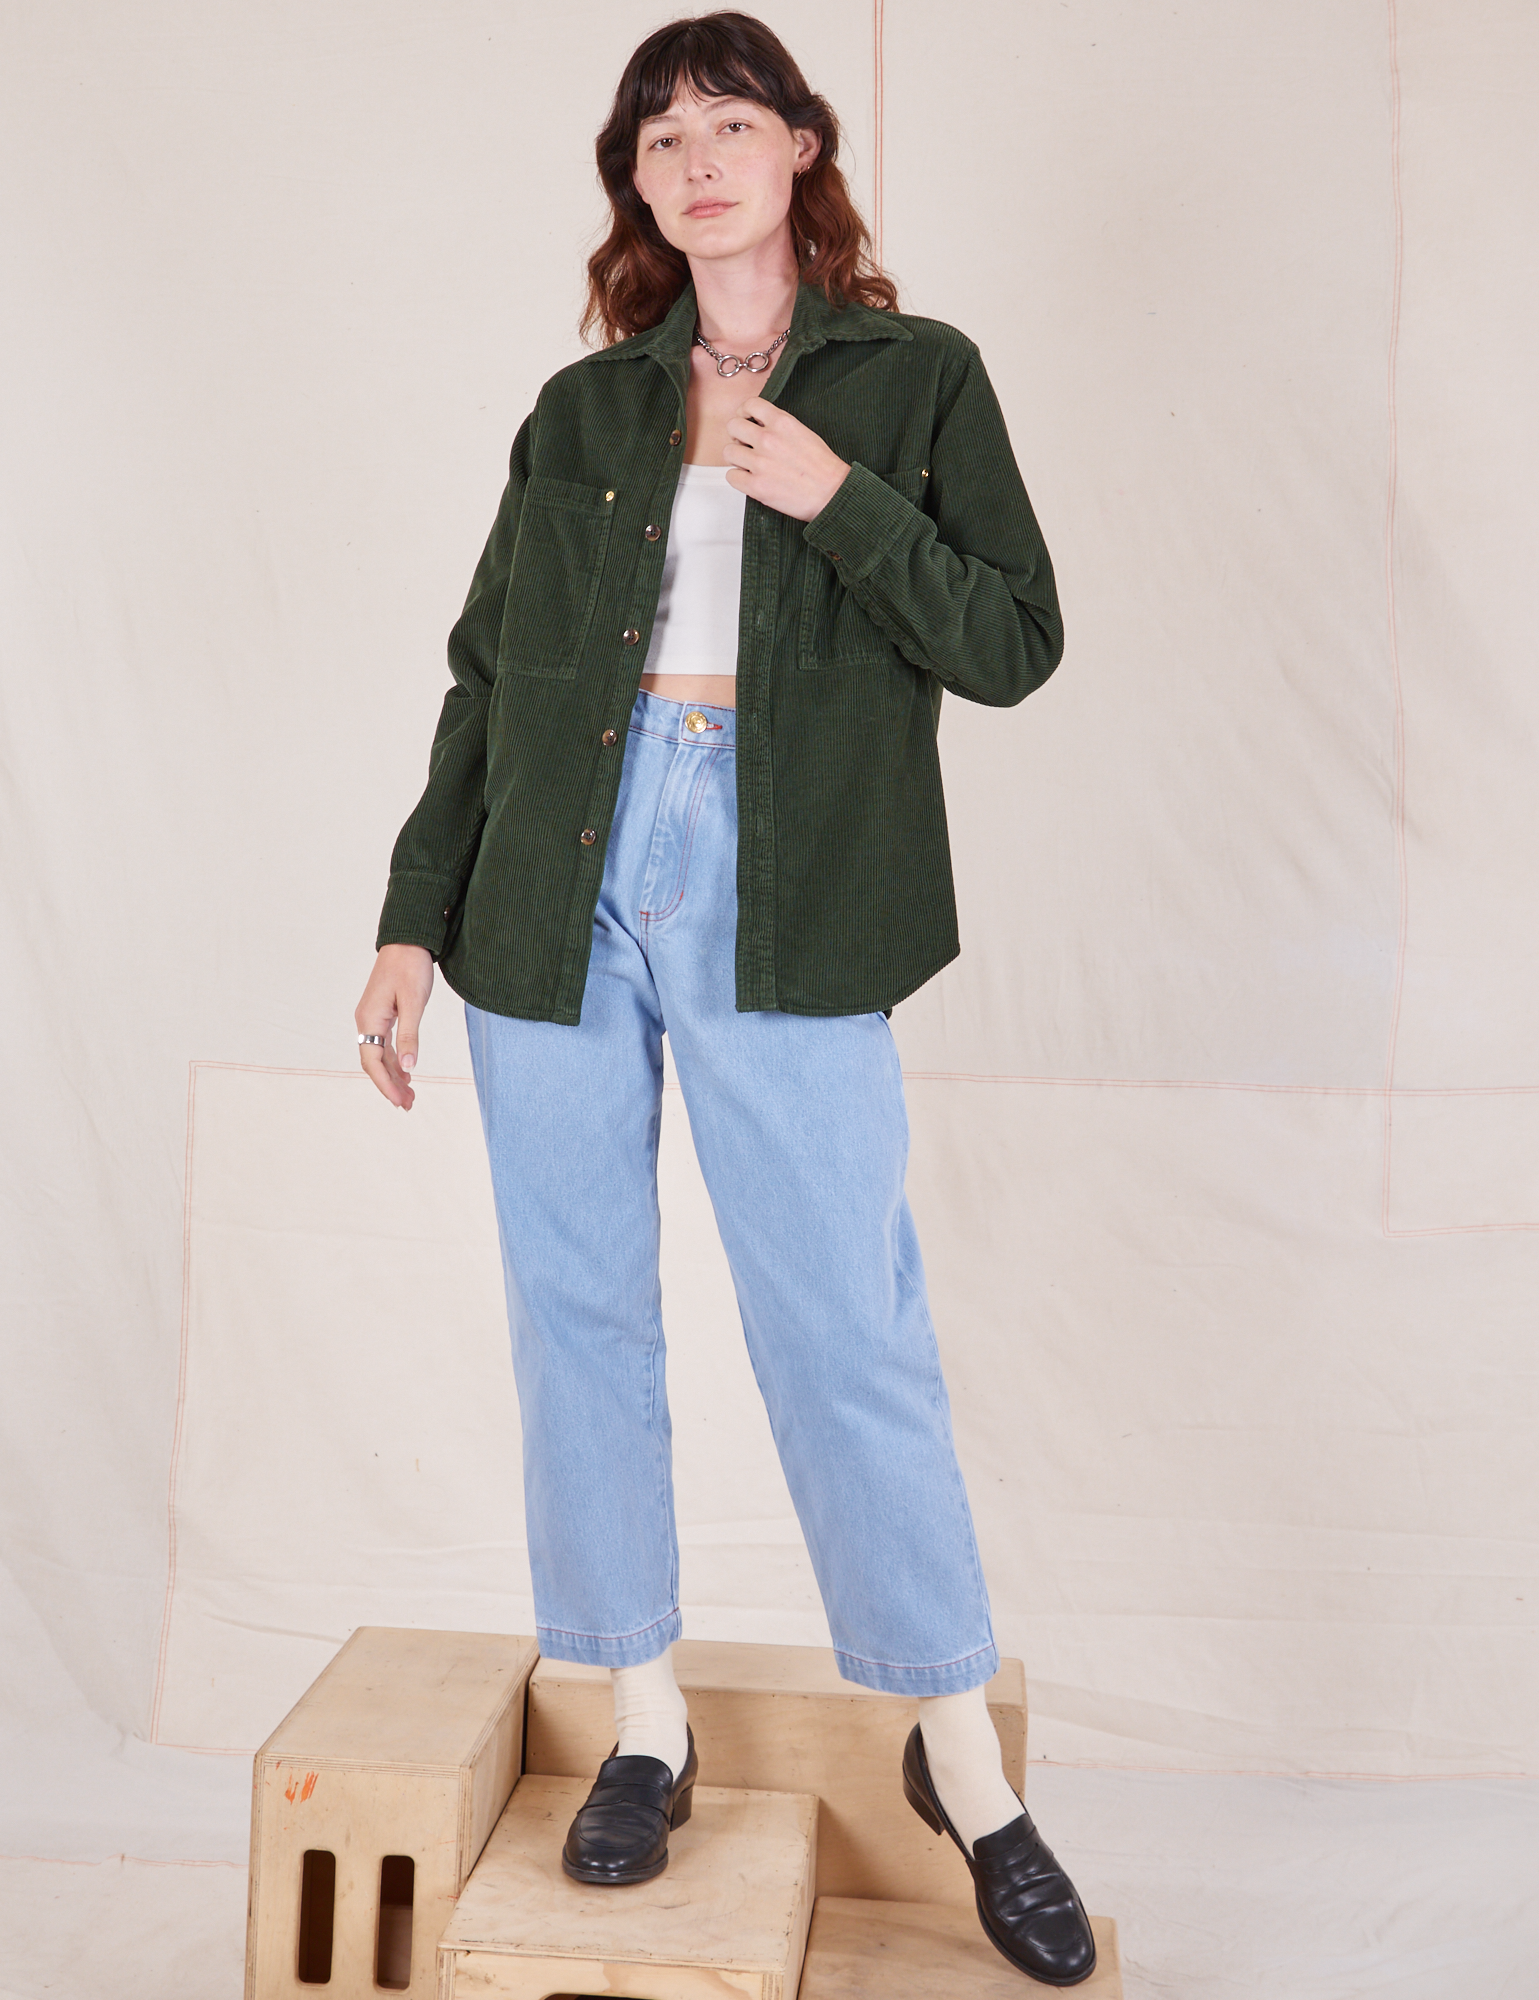 Alex is wearing Corduroy Overshirt in Swamp Green and light wash Denim Trouser Jeans